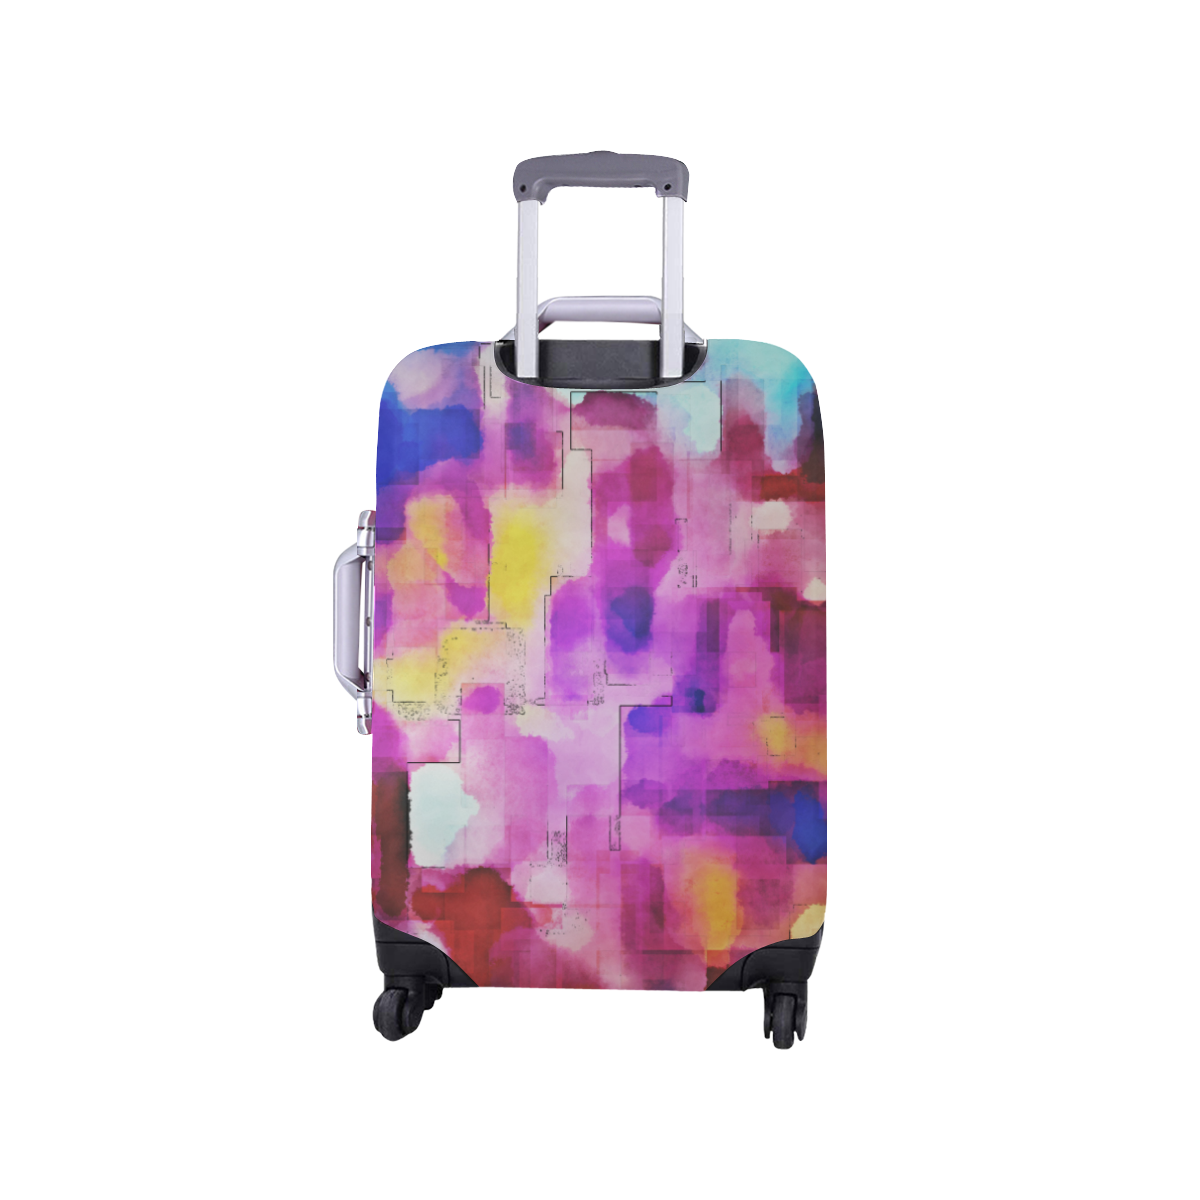 Blue pink watercolors Luggage Cover/Small 18"-21"